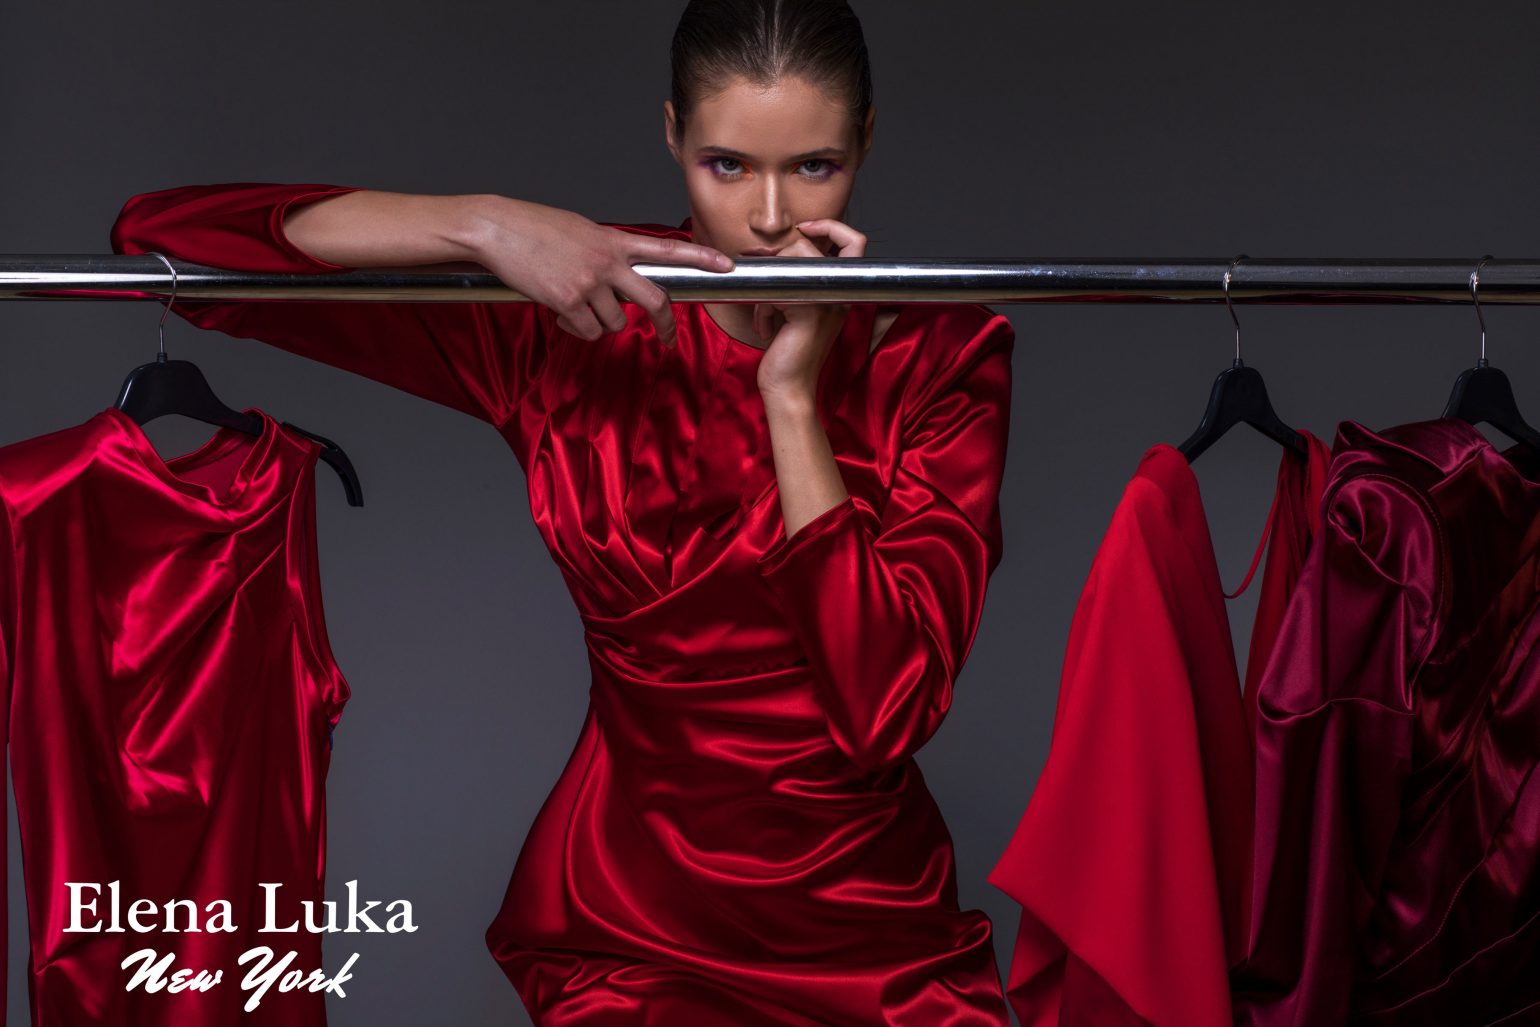 EXCLUSIVE NEWS: THE LUXURIOUS BRAND ELENA LUKA TAKES ITS GLAMOUR TO NEW YORK CITY! - New